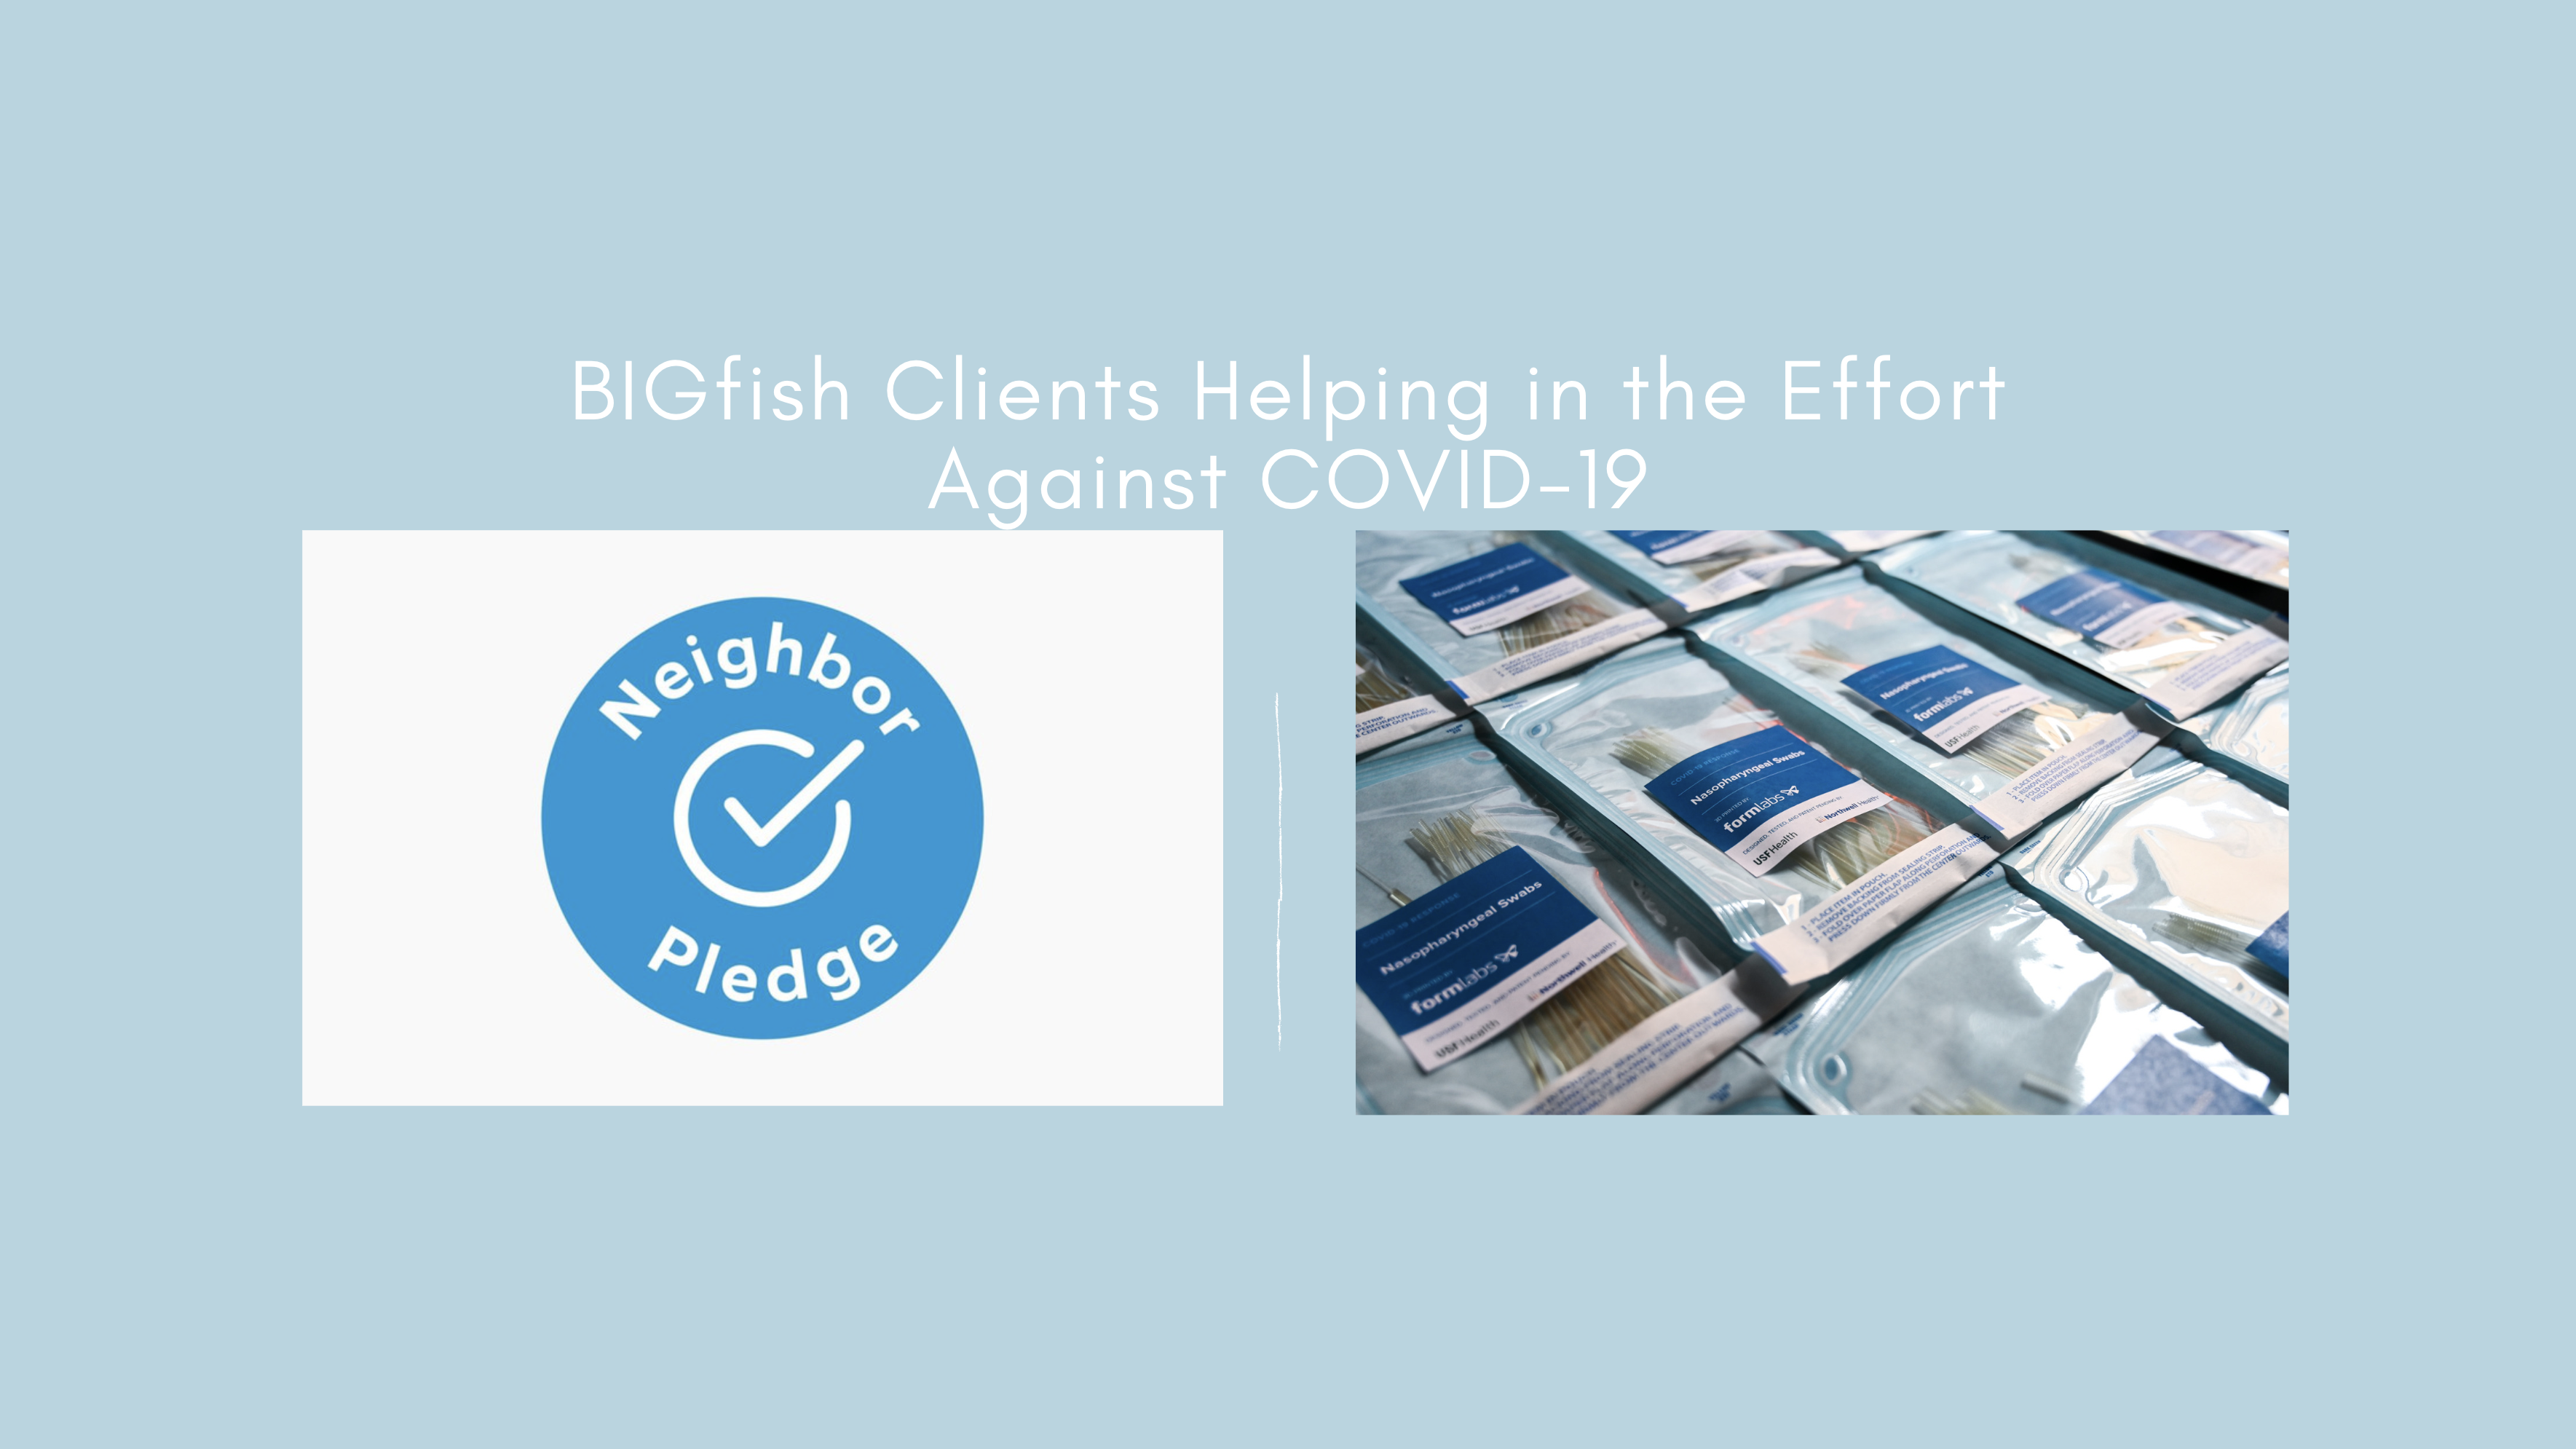 How BIGfish Clients Are Helping During COVID-19